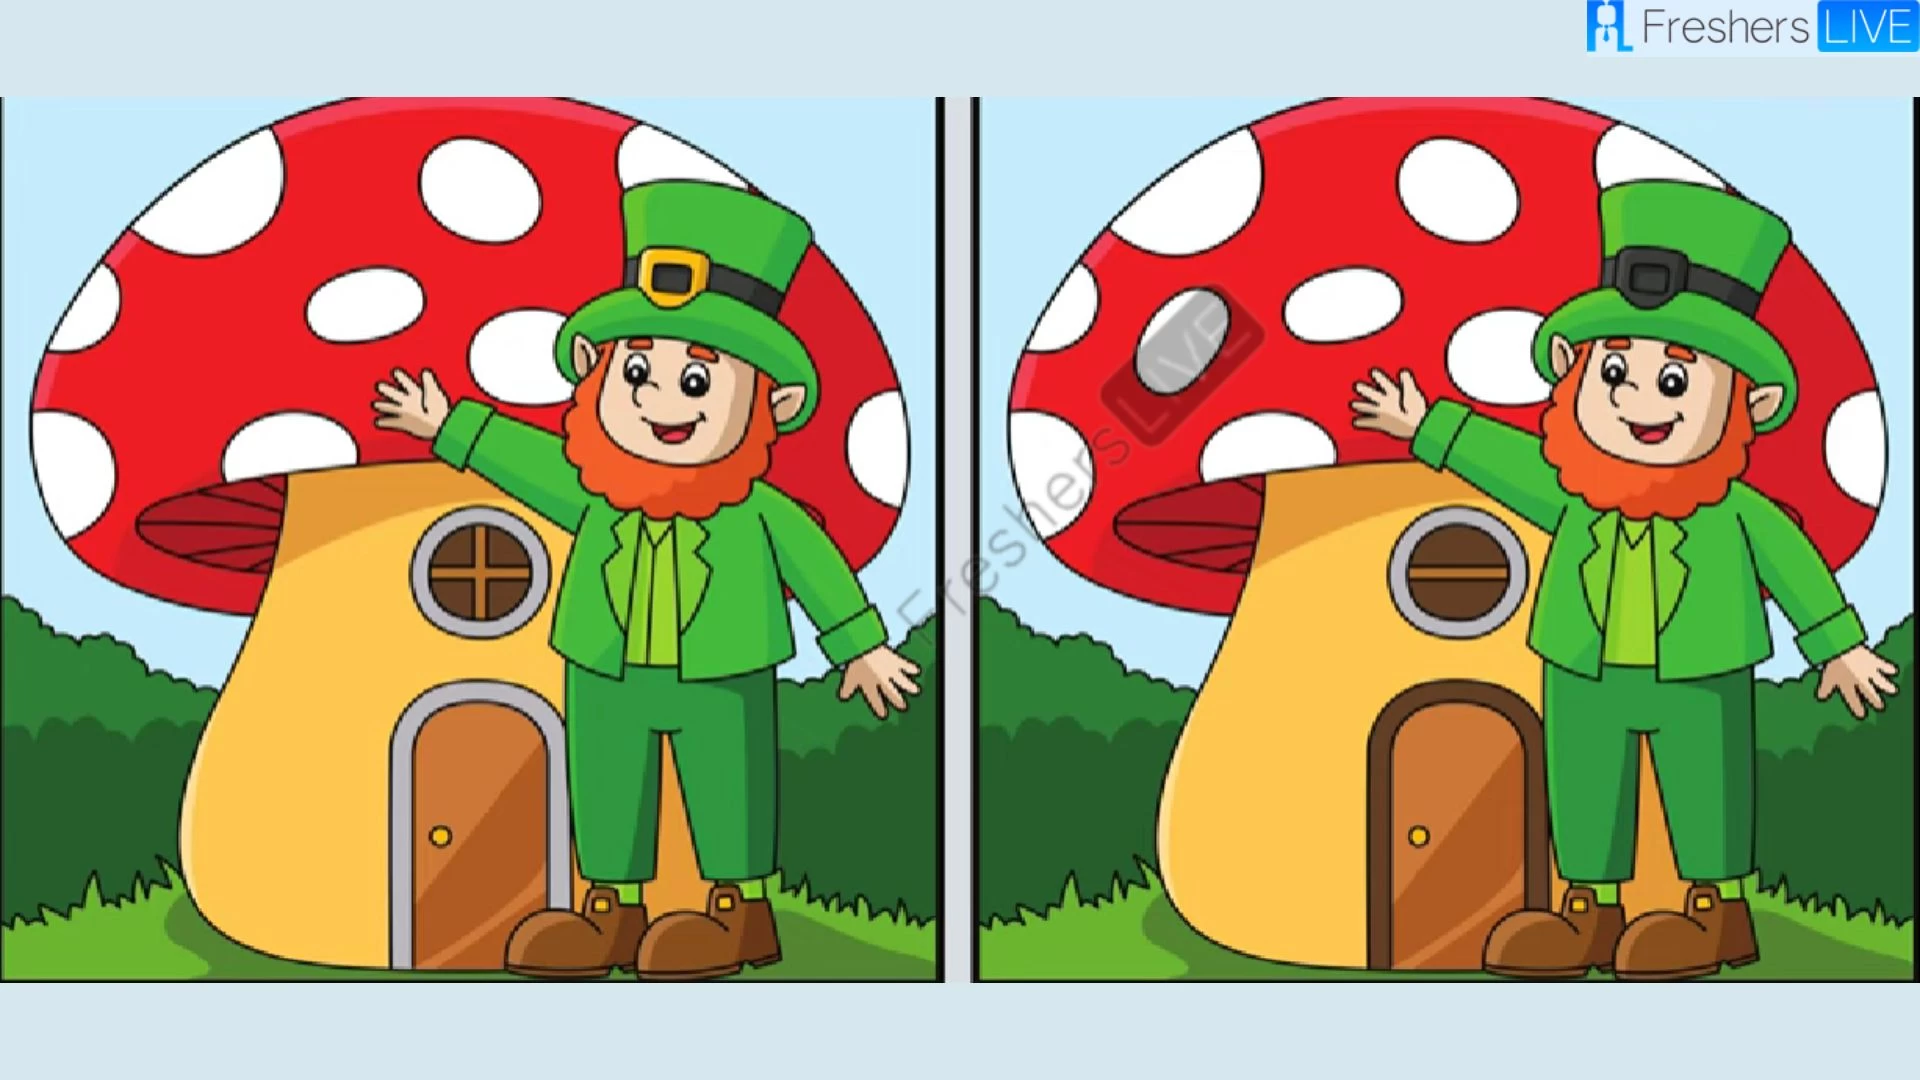 Only Someone with a Sharp Eye Can Spot 6 Differences in 20 Seconds